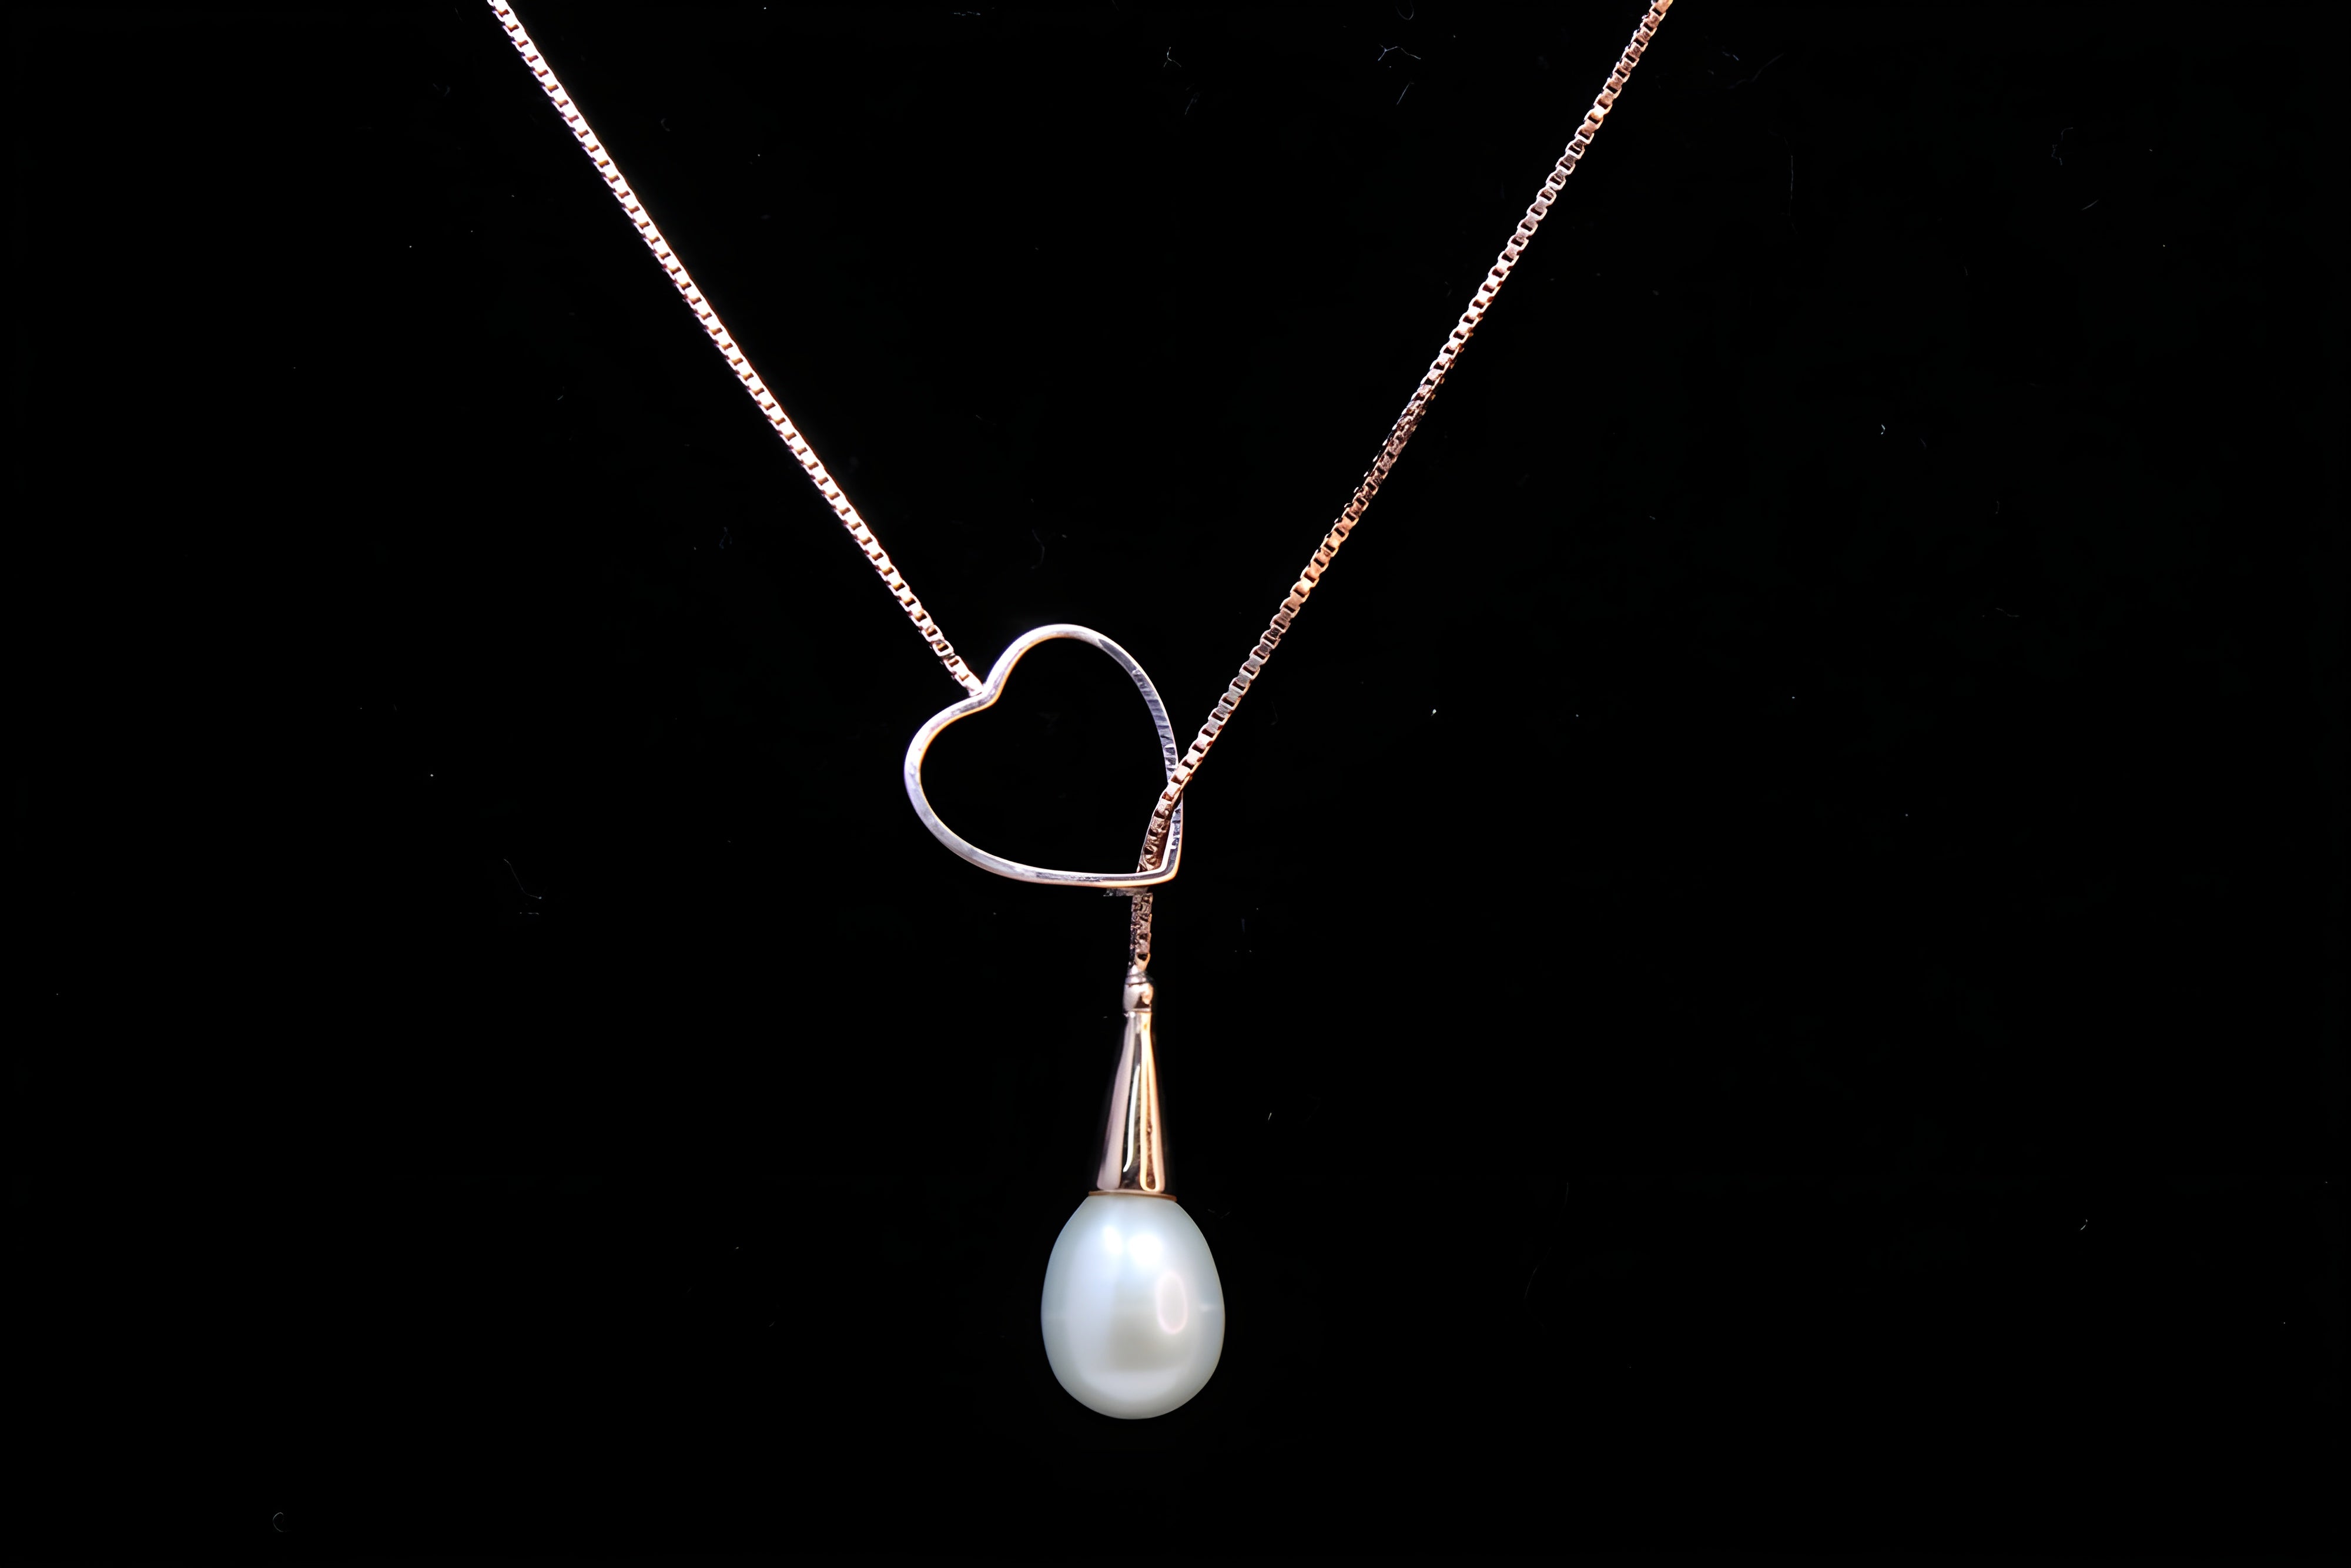 Golden Serenade Sterling Silver Pendant Set with Drop-Shaped Artificial Pearls